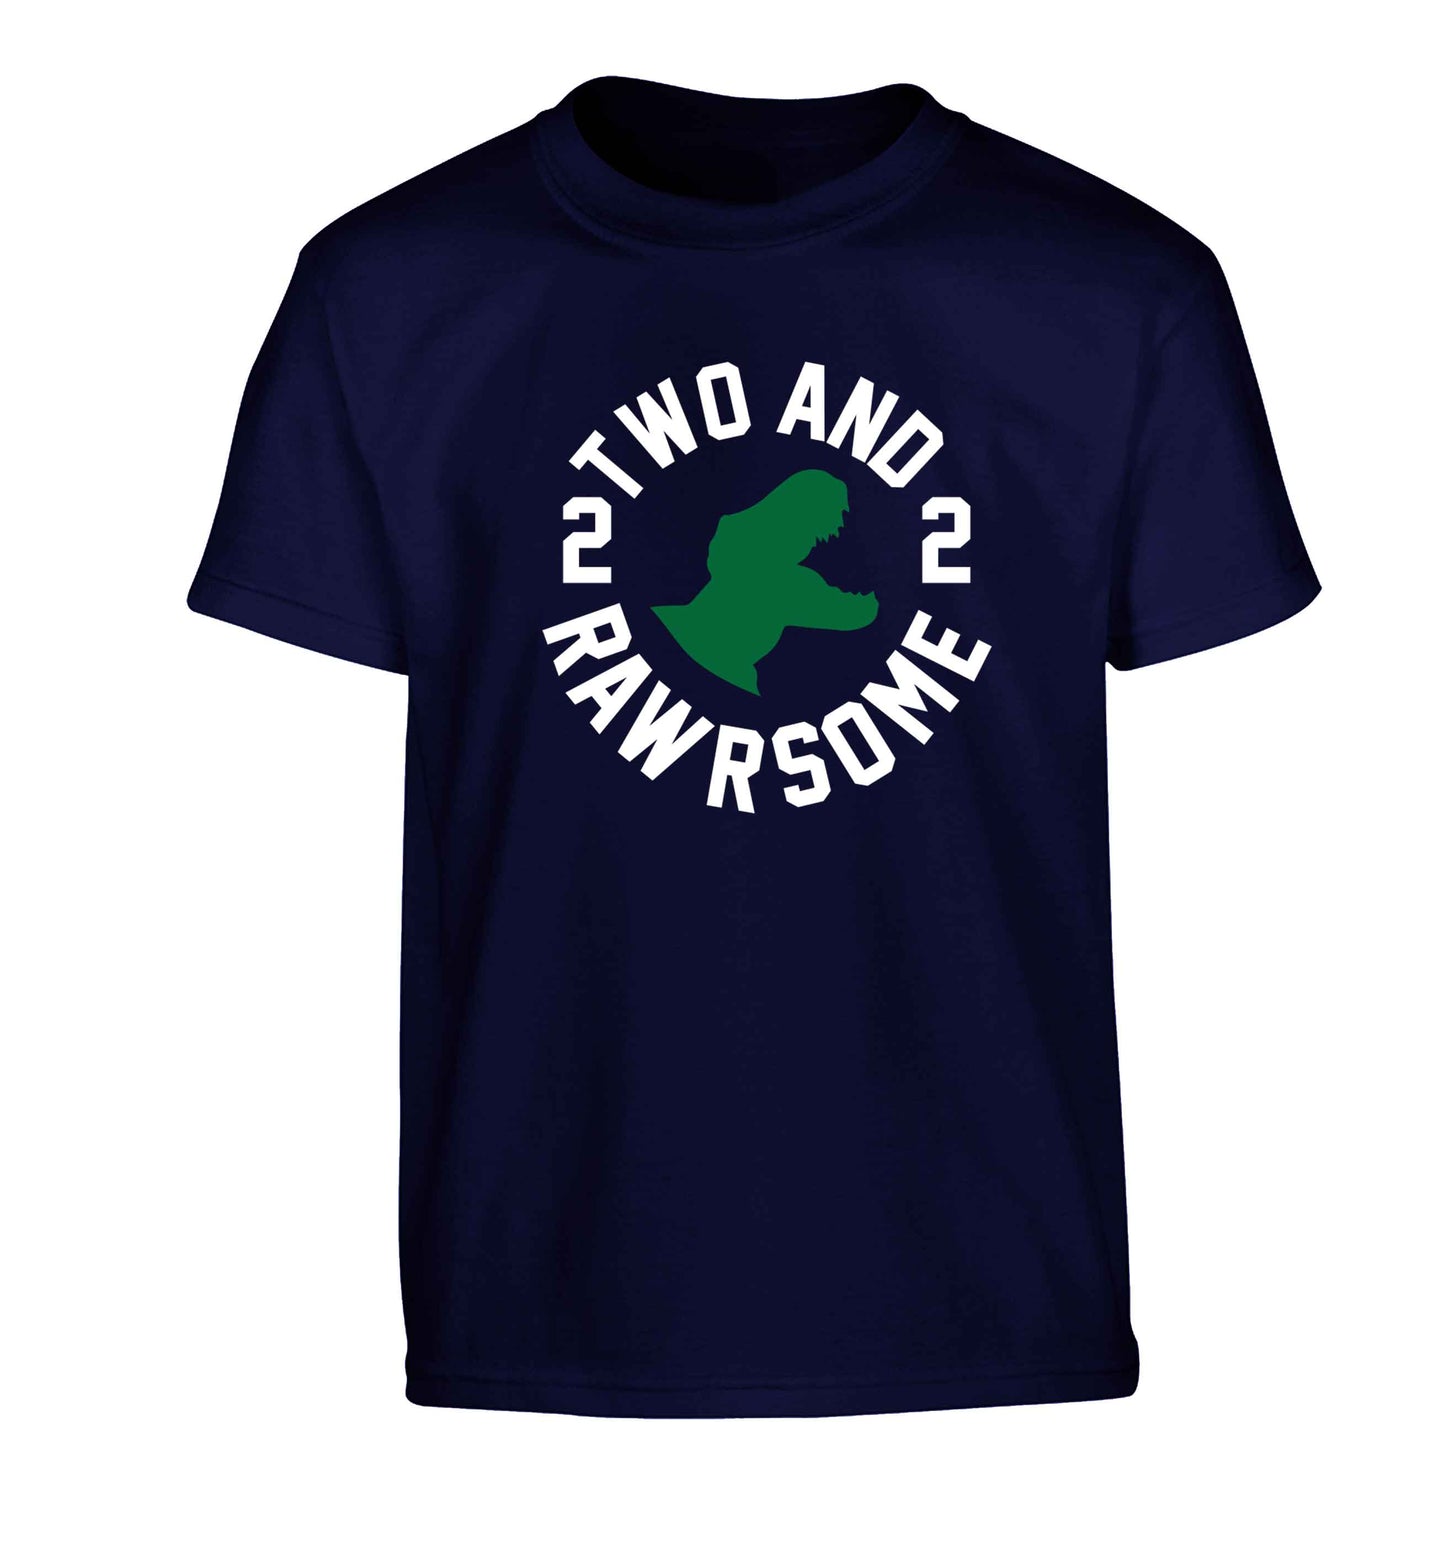 Two and rawrsome Children's navy Tshirt 12-13 Years